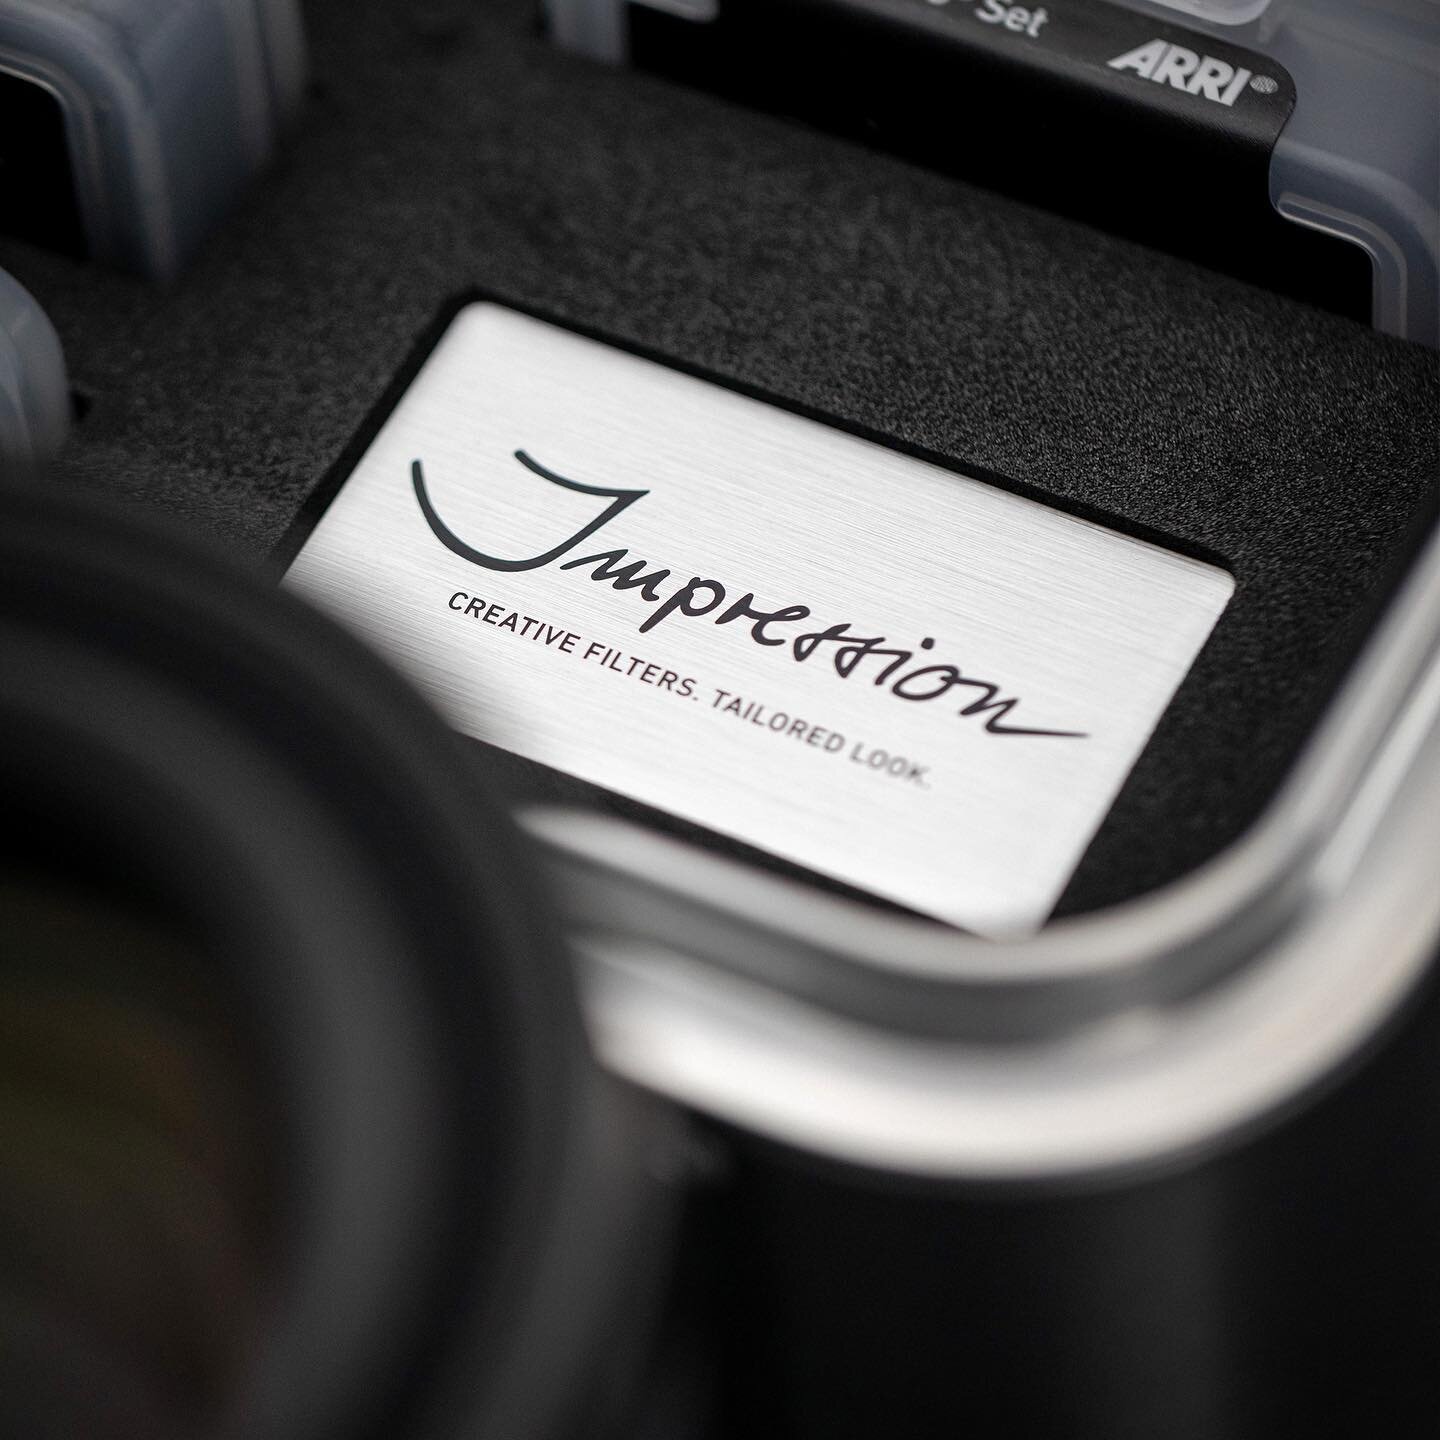 We&rsquo;re excited to add Arri&rsquo;s new Impression V Filters to our inventory. A set of 8 magnetic diopters allowing you to incrementally detune the Signature Primes &amp; Zooms to your liking.
.
The set consists of 4 positive, and 4 negative rea